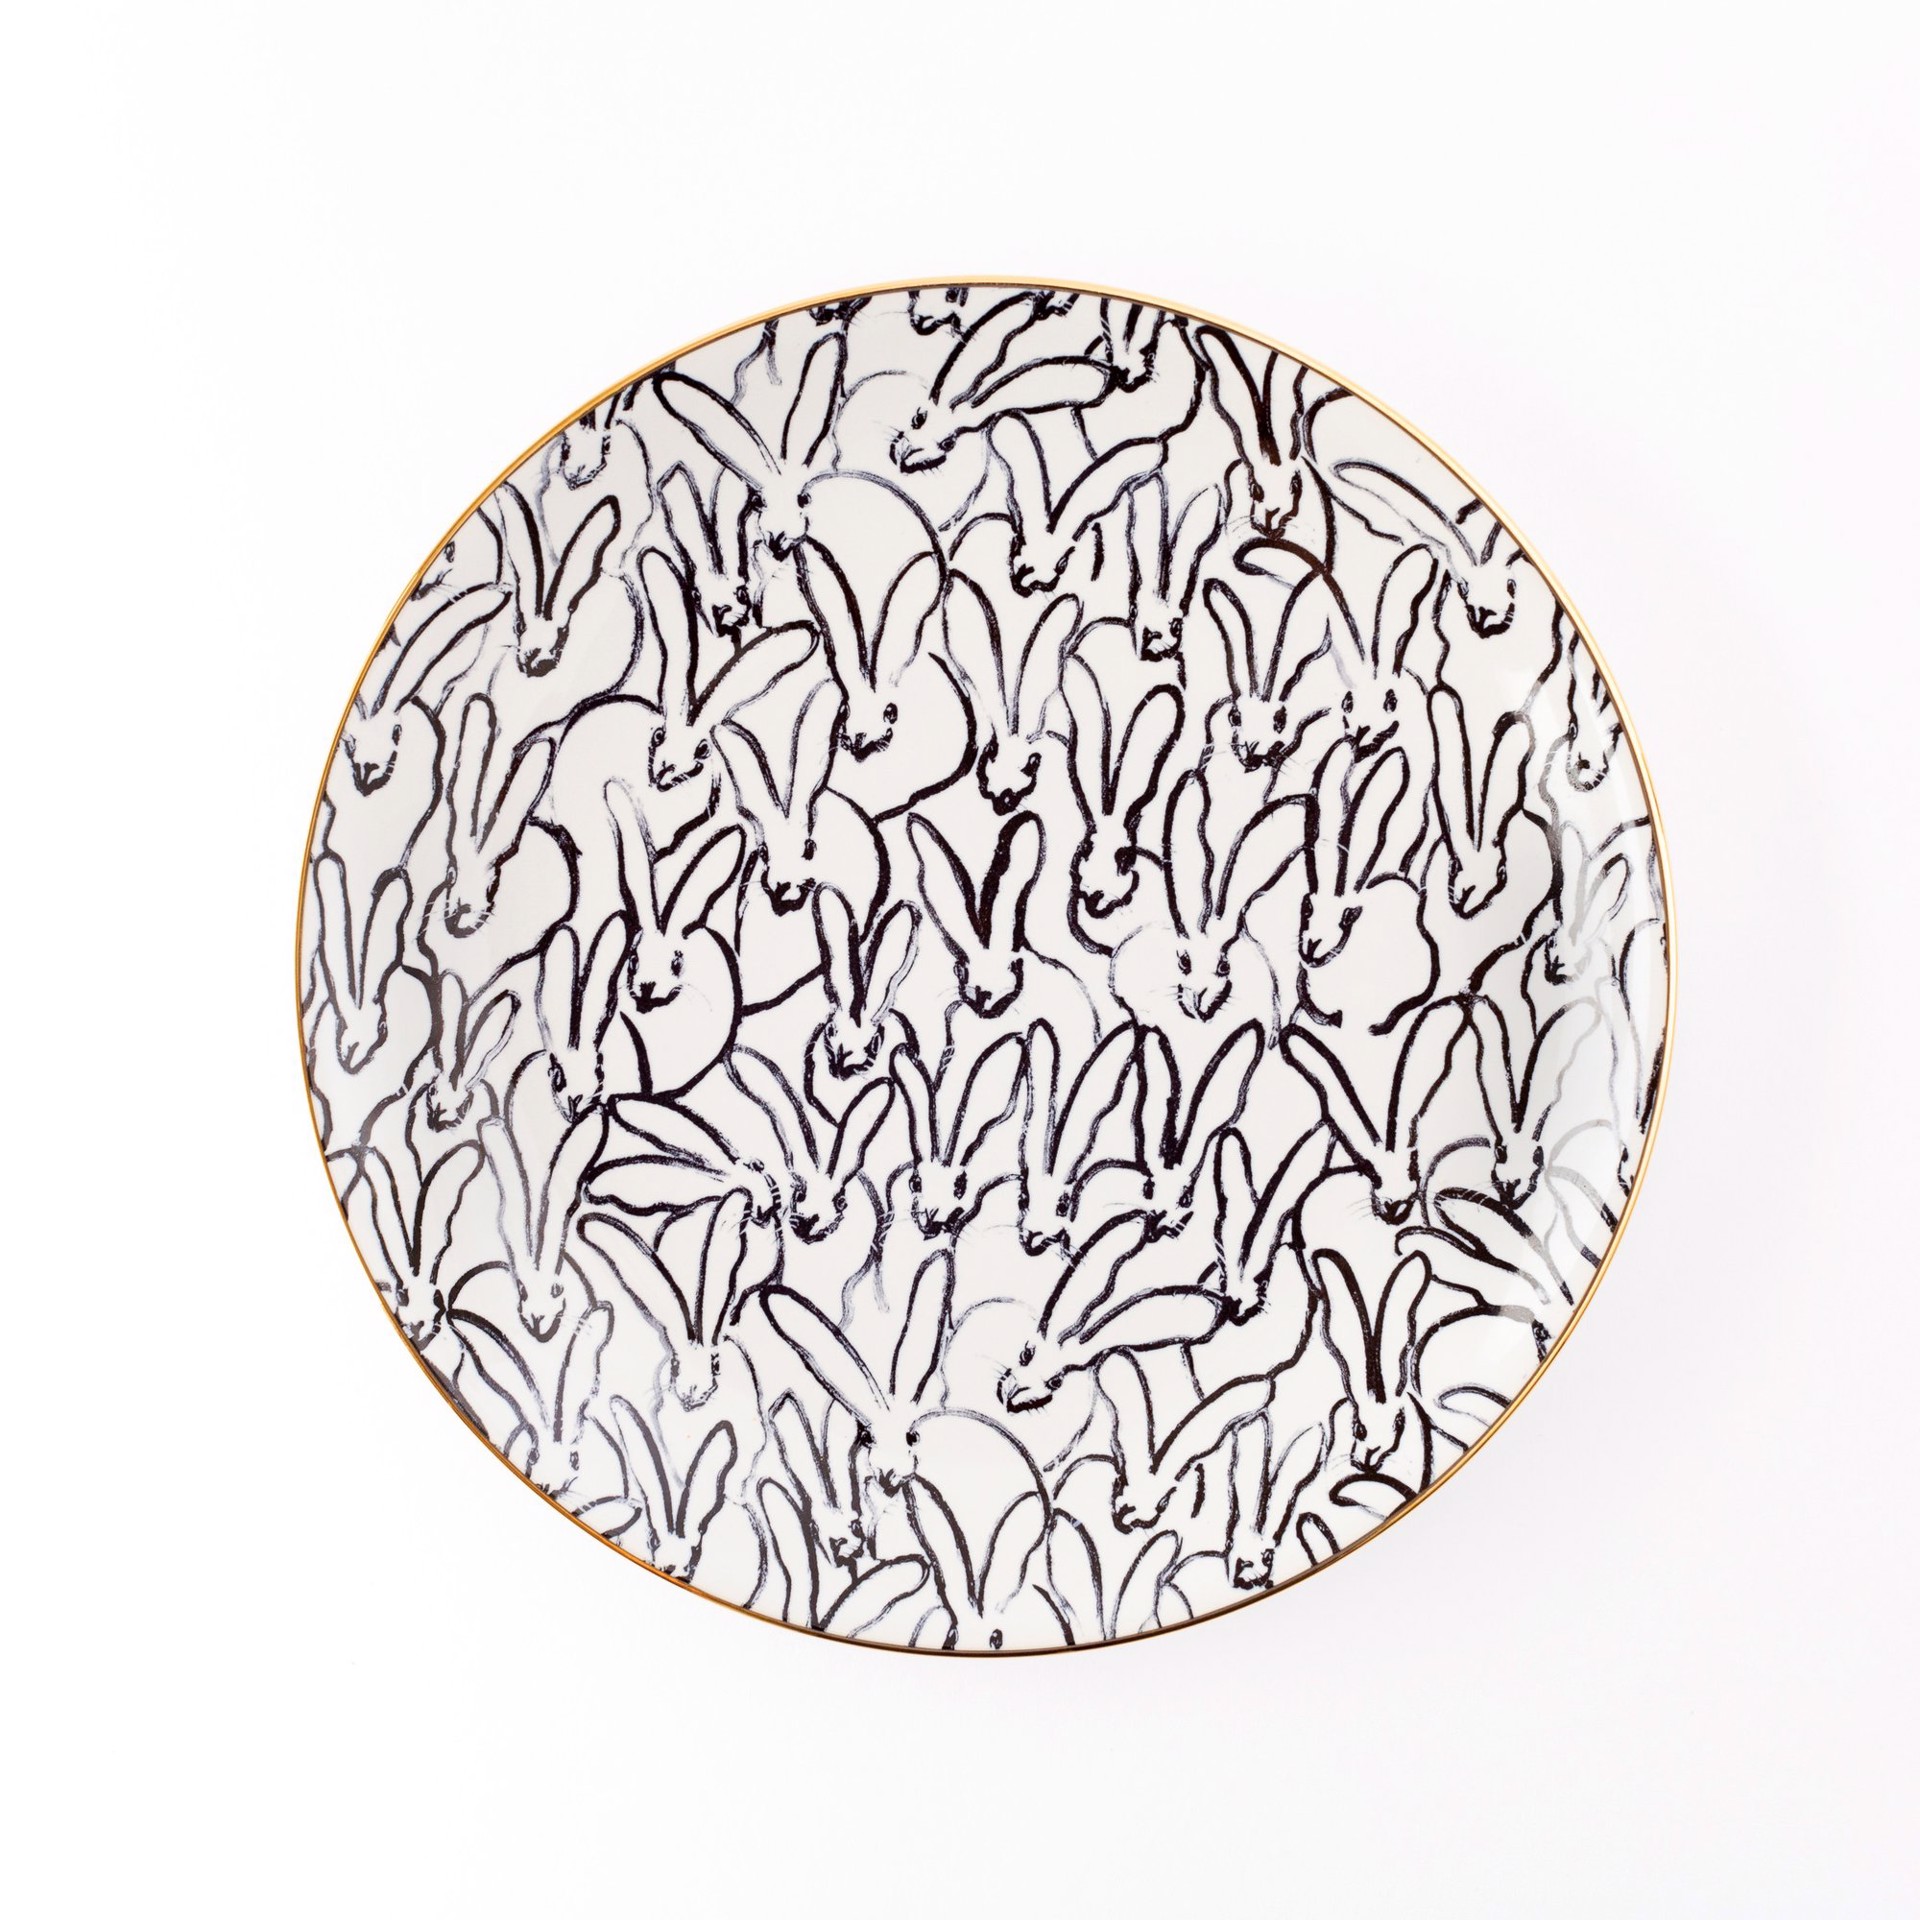 Rabbit Run Salad Plate with Hand-Painted Gold Rim by Hunt Slonem (Hop Up Shop)